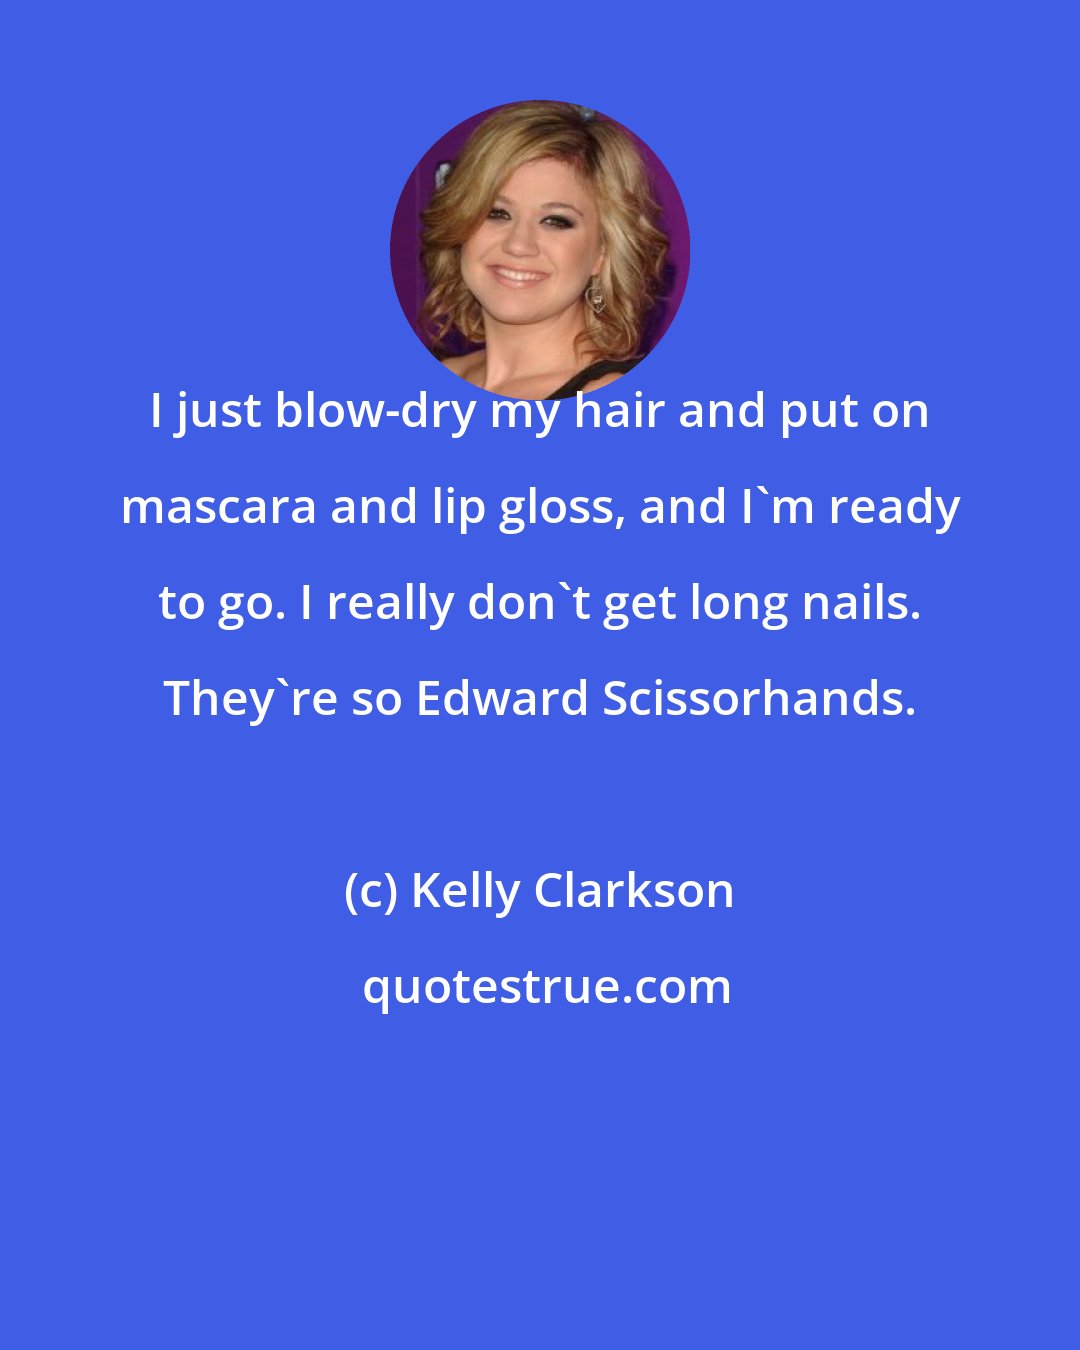 Kelly Clarkson: I just blow-dry my hair and put on mascara and lip gloss, and I'm ready to go. I really don't get long nails. They're so Edward Scissorhands.